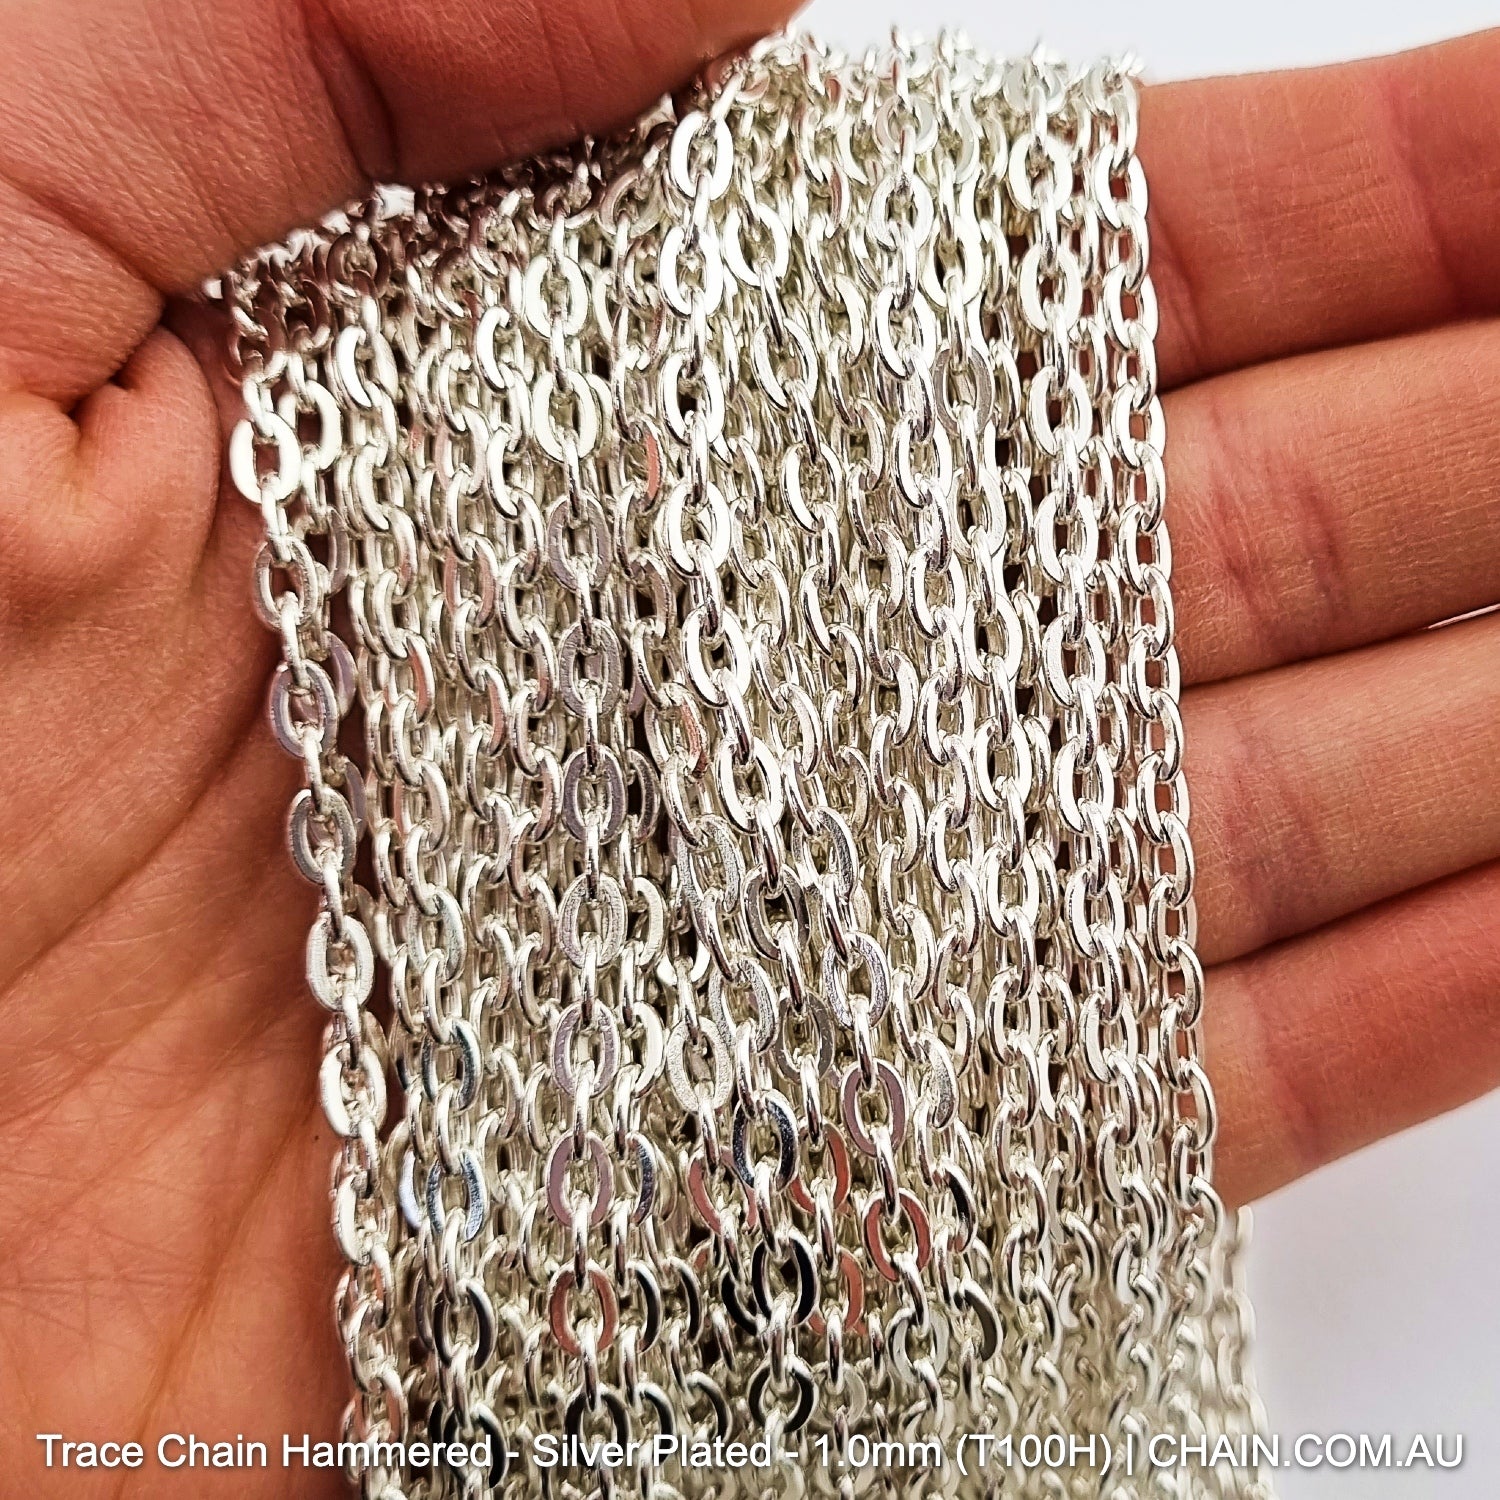 Hammered Trace Chain in a Silver Plated Finish. Size: 1.0mm, T100H. Jewellery Chain, Australia wide shipping. Shop chain.com.au